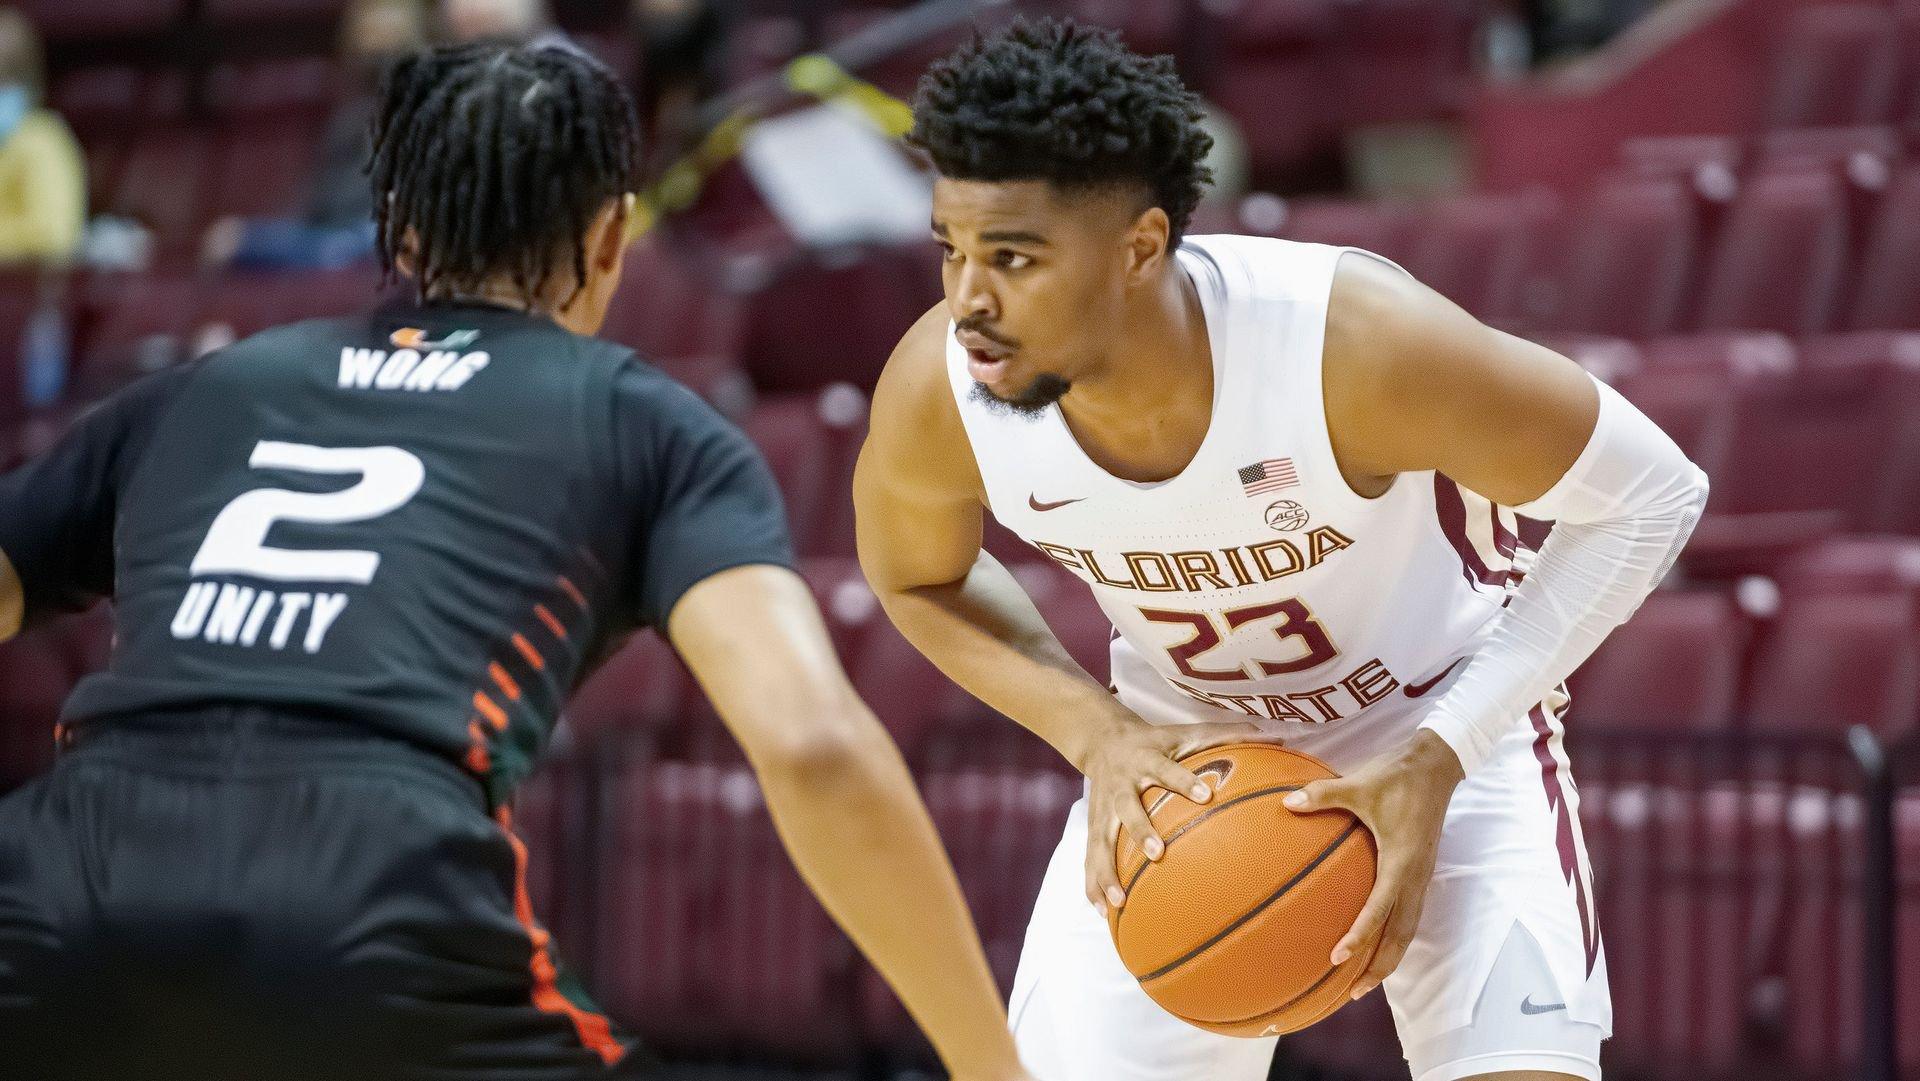 ACC Tournament Odds: Florida State Tops List of Contenders in Wide-Open Field